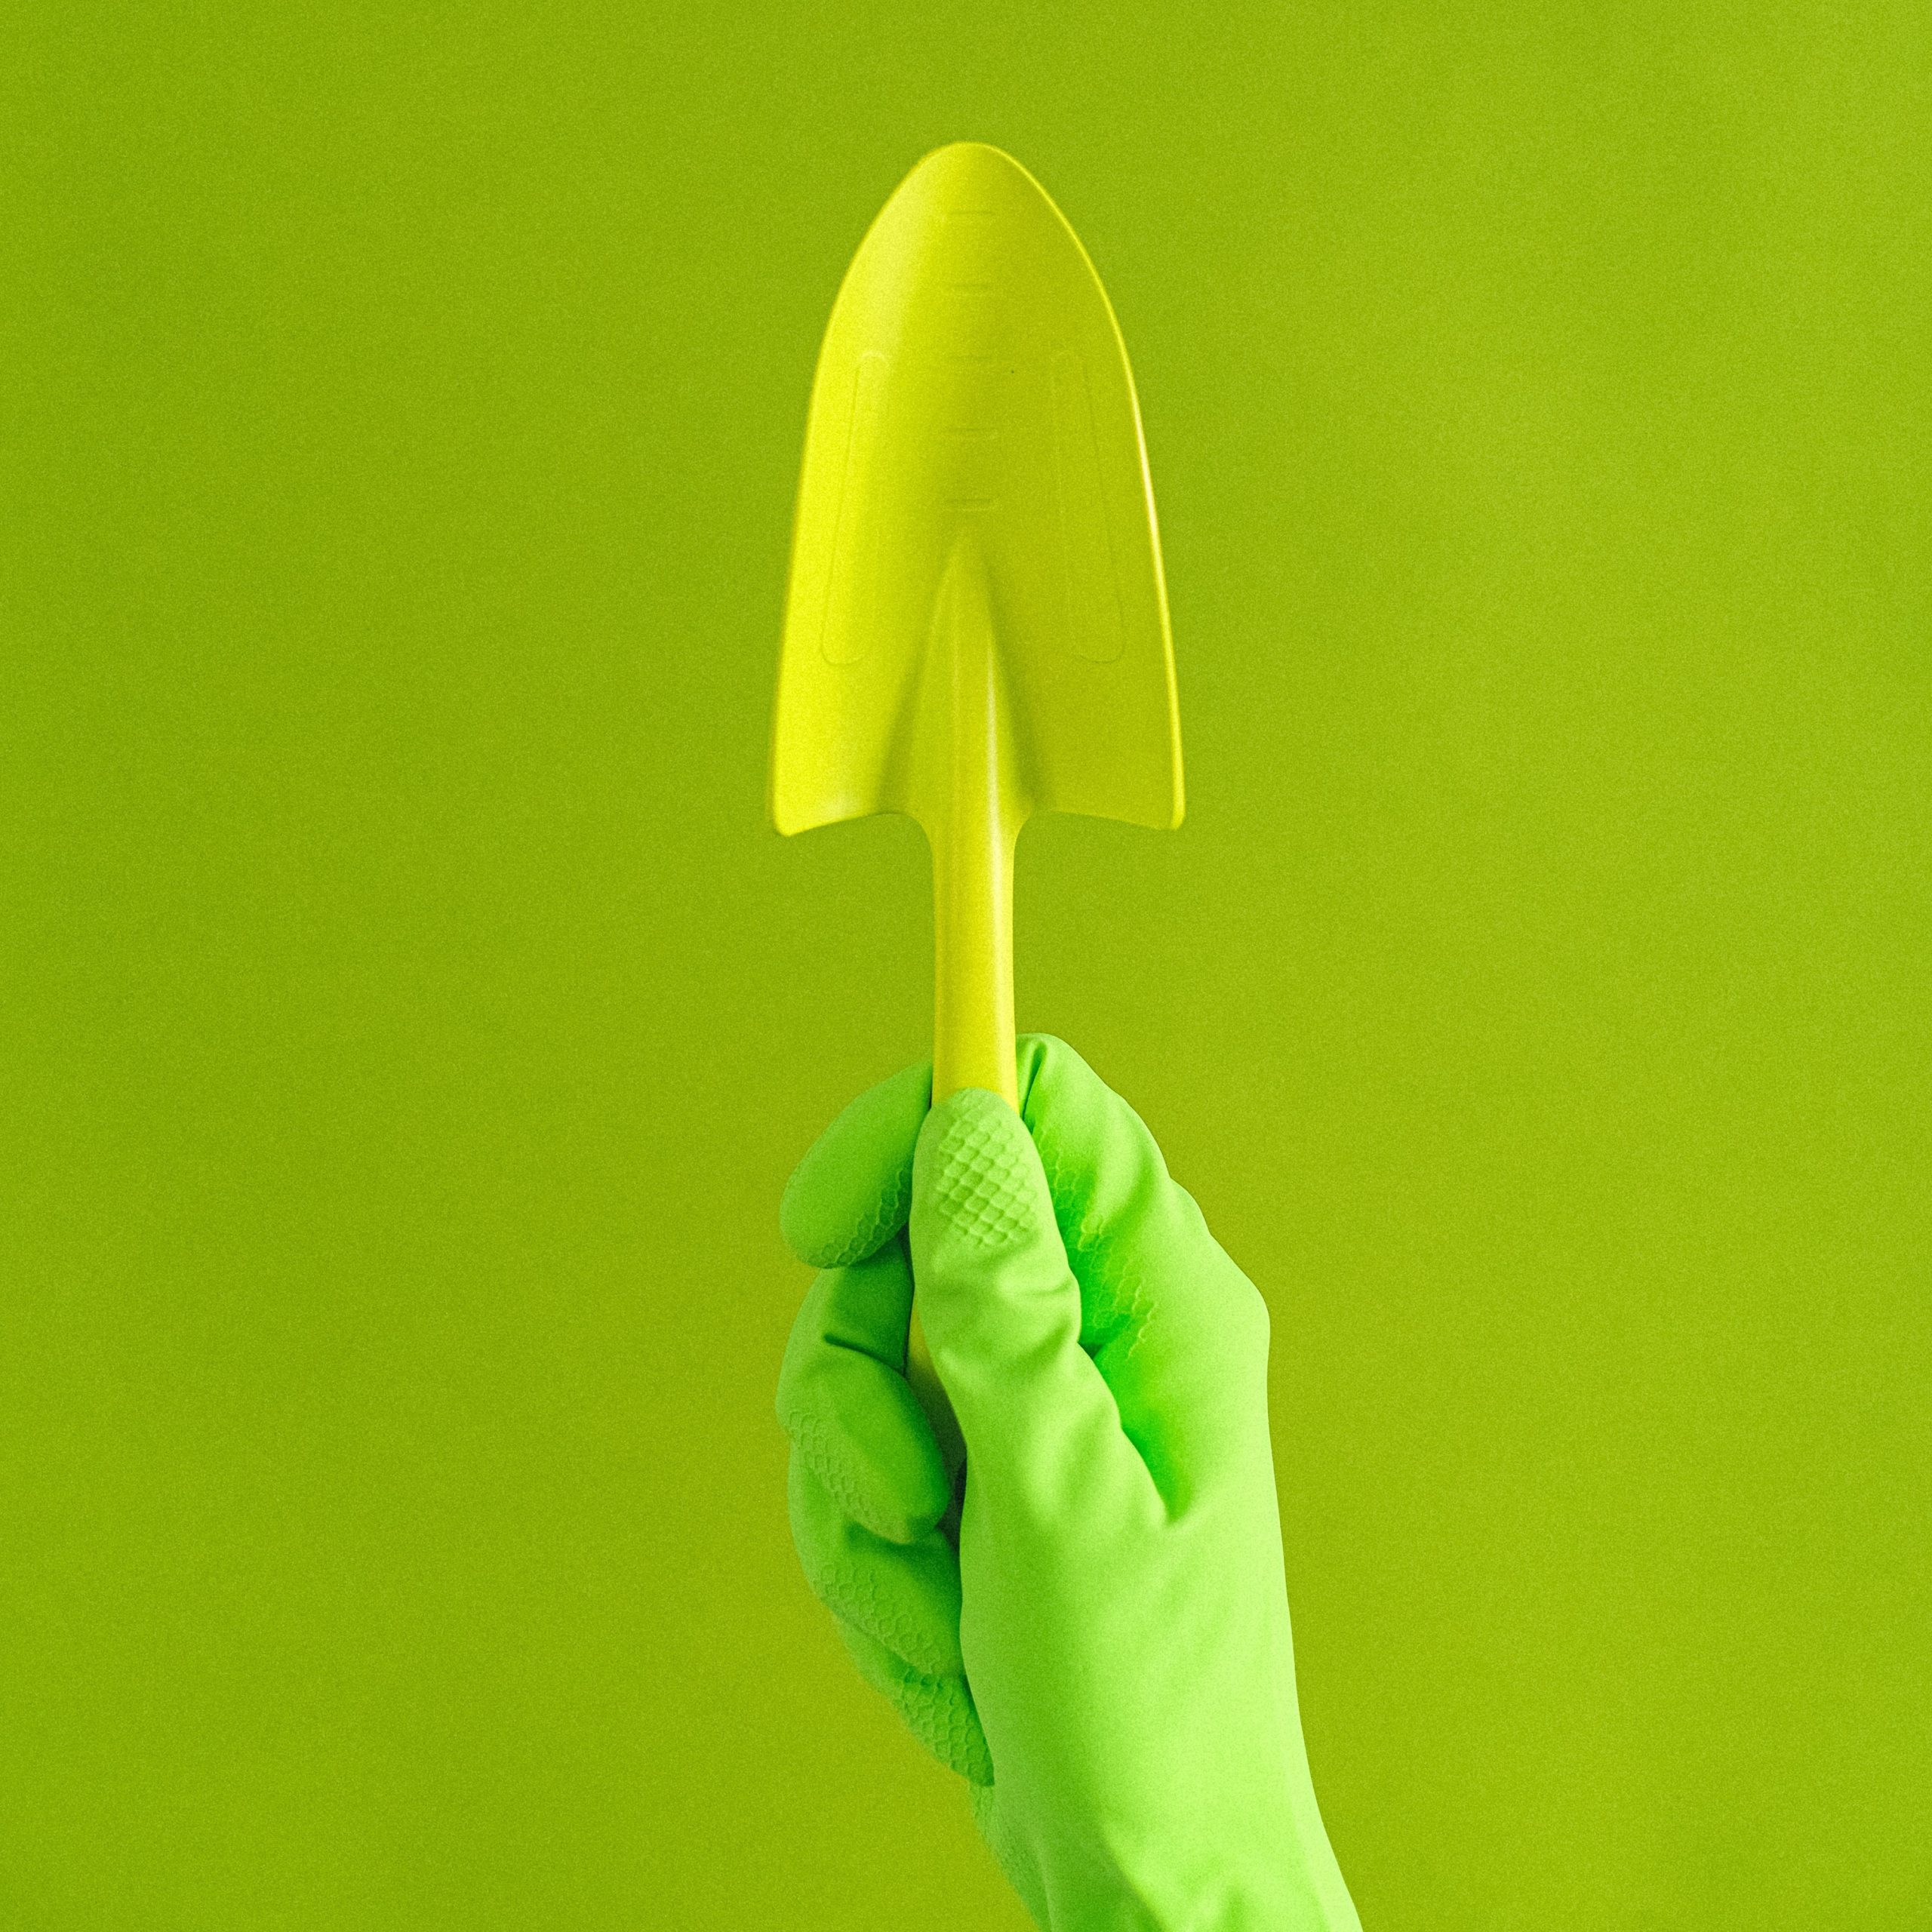 A photo of a green-gloved hand holding a green garden trowel against a green background